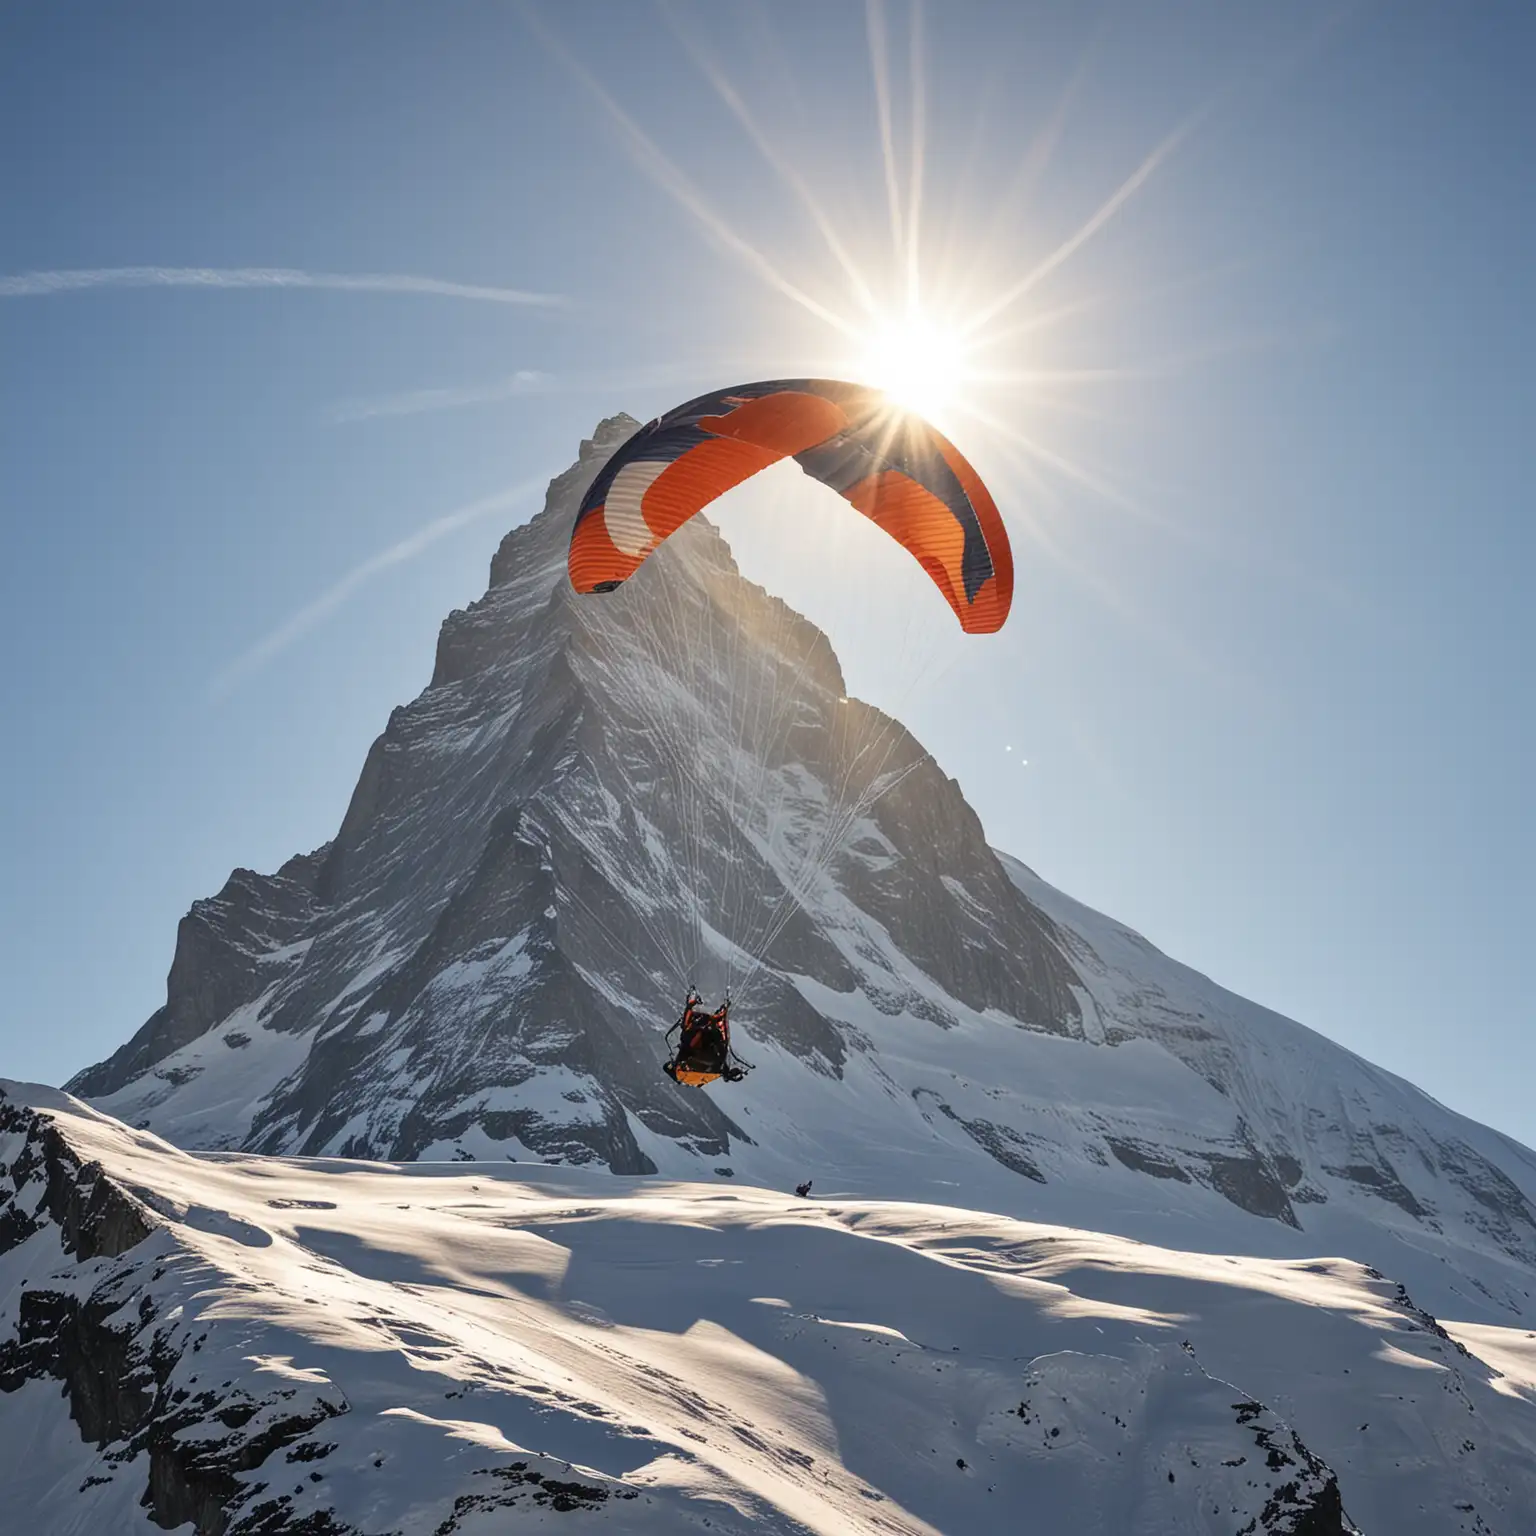 Majestic Matterhorn Summit with Soaring Snow Paraglider and Pristine Snowscape